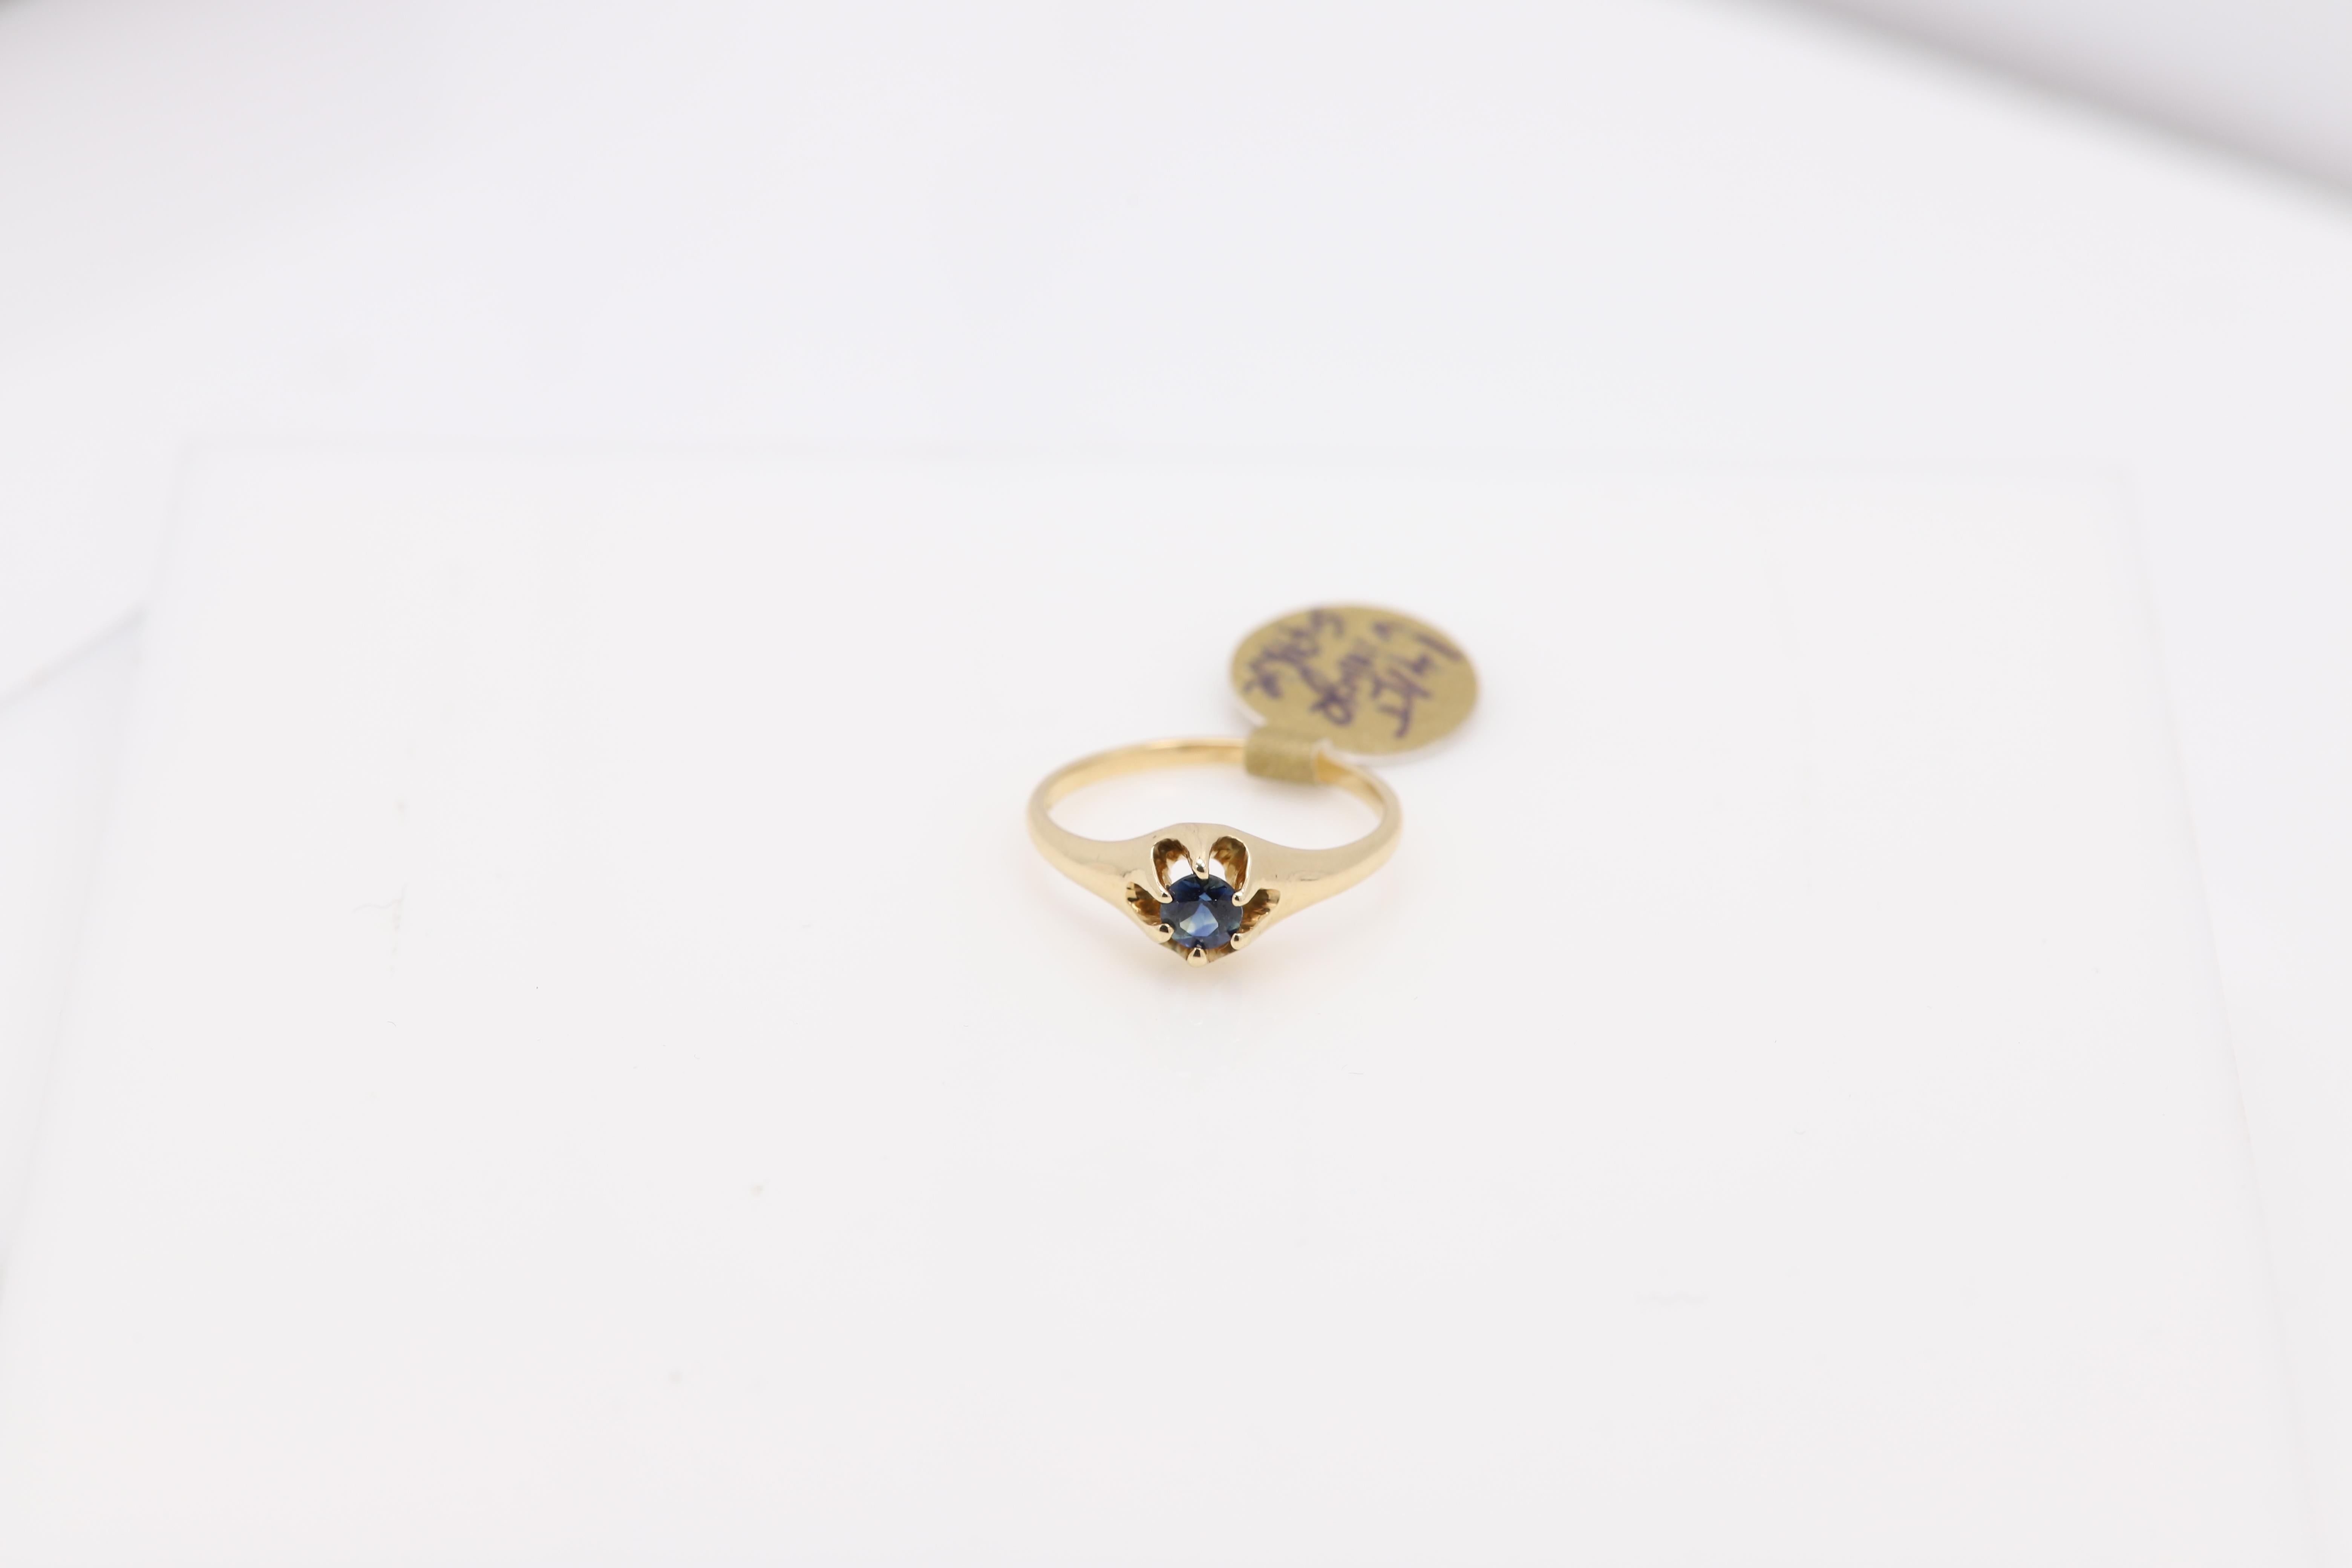 Vintage Cute Sapphire Ring
Circa 1940's
14k Yellow Ring
finger size 5.25
Weight 2.2 grams
Natural Sapphire size approx 4.0mm nice Blue Tone
(#bjn 1934591)